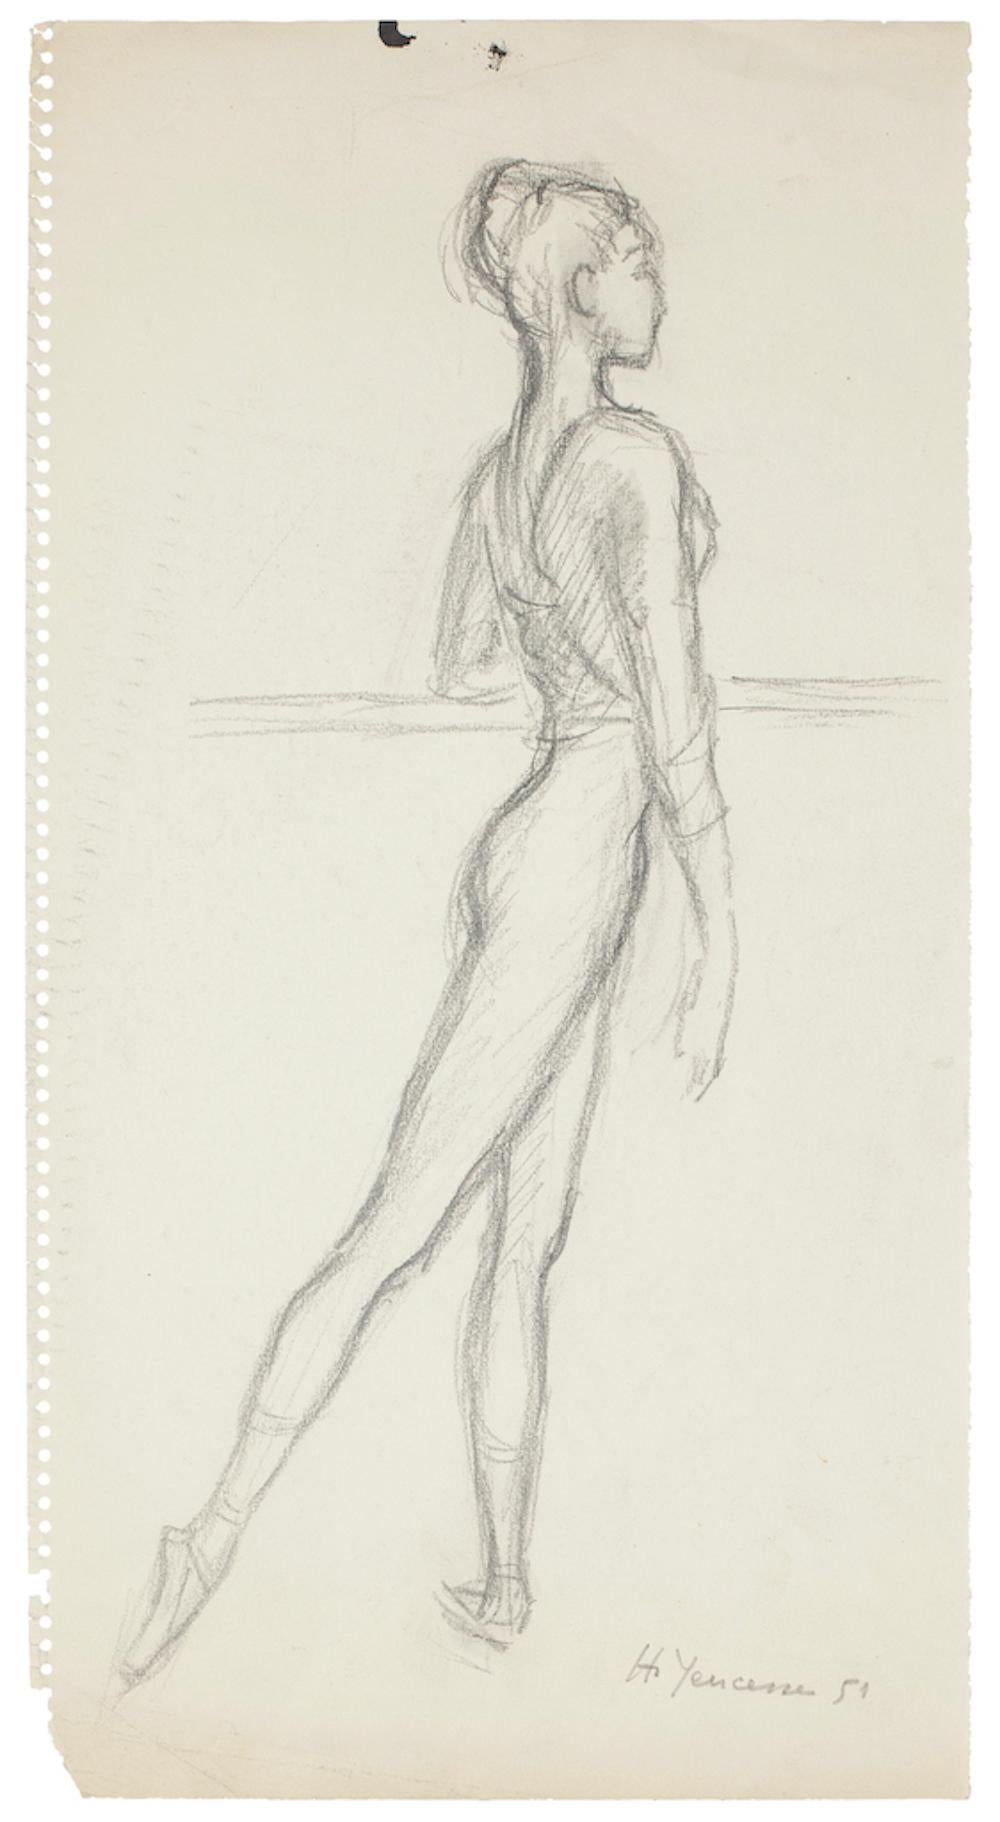 Ballet Dancers - Set of 15 Pencil and Charcoal Drawings by H. Yencesse - 1951 3